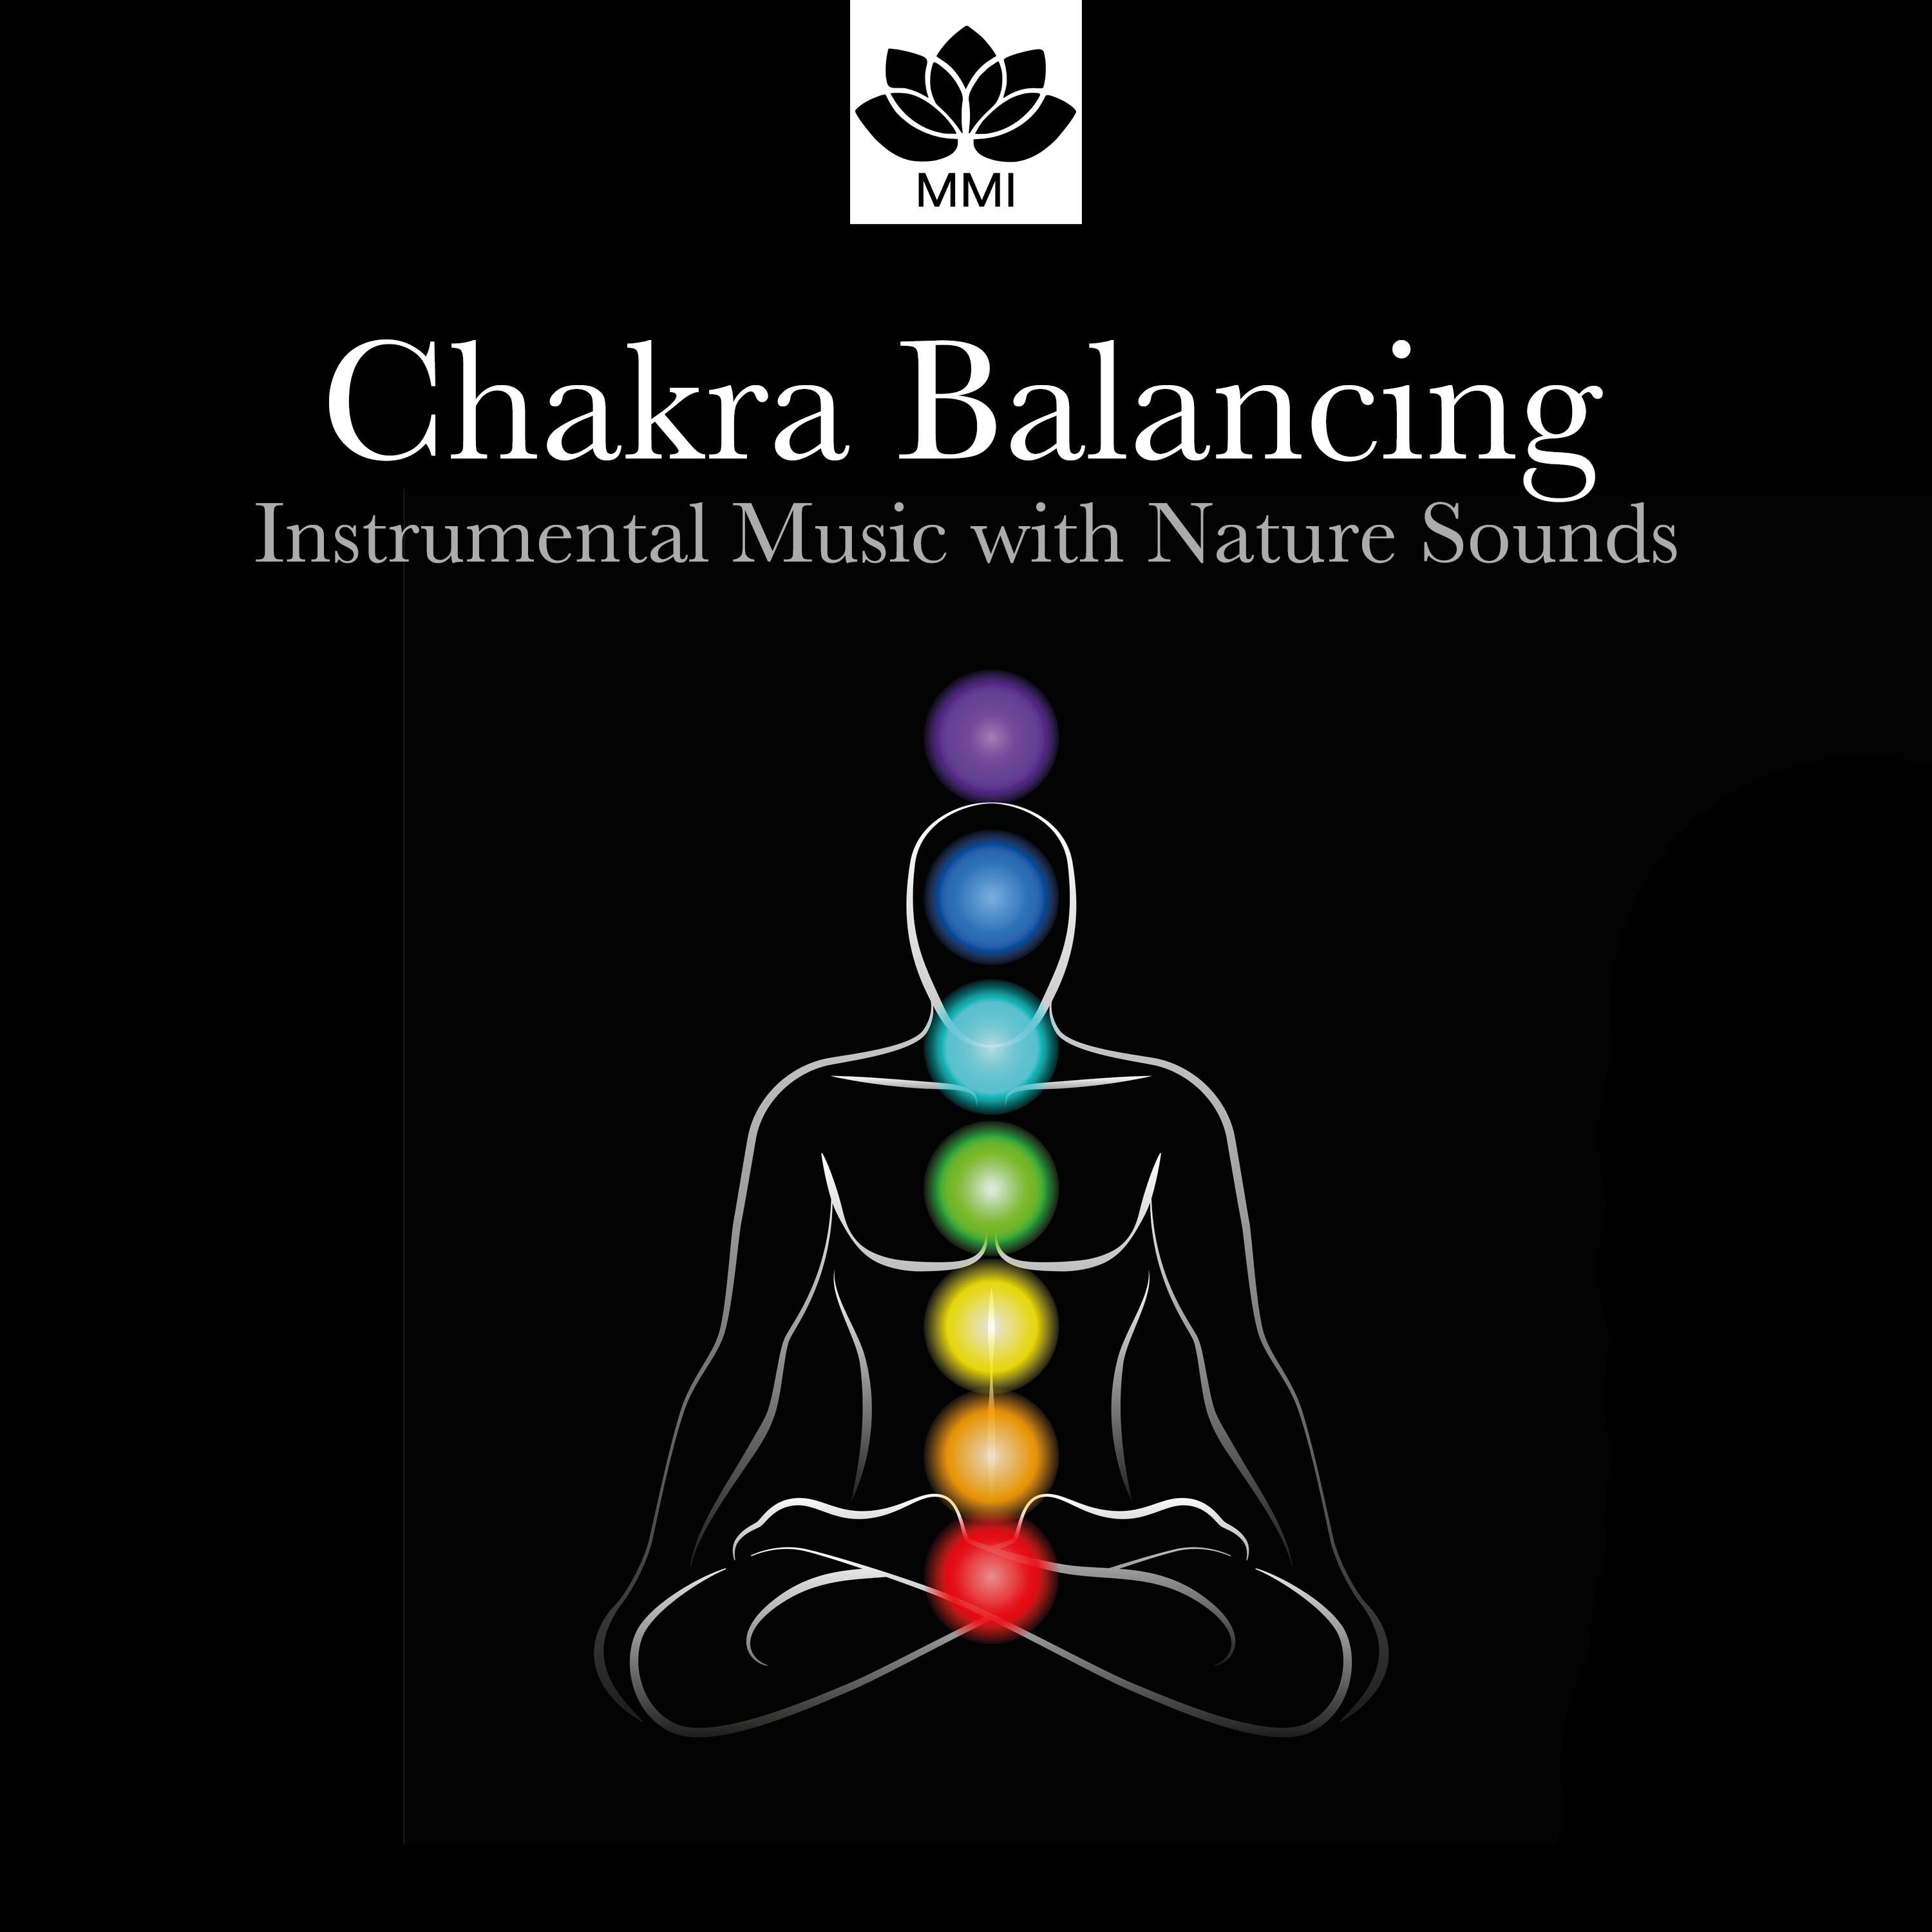 Chakra Balancing: Easy Going Electro Tracks, Instrumental Music with Nature Sounds for Inner Peace